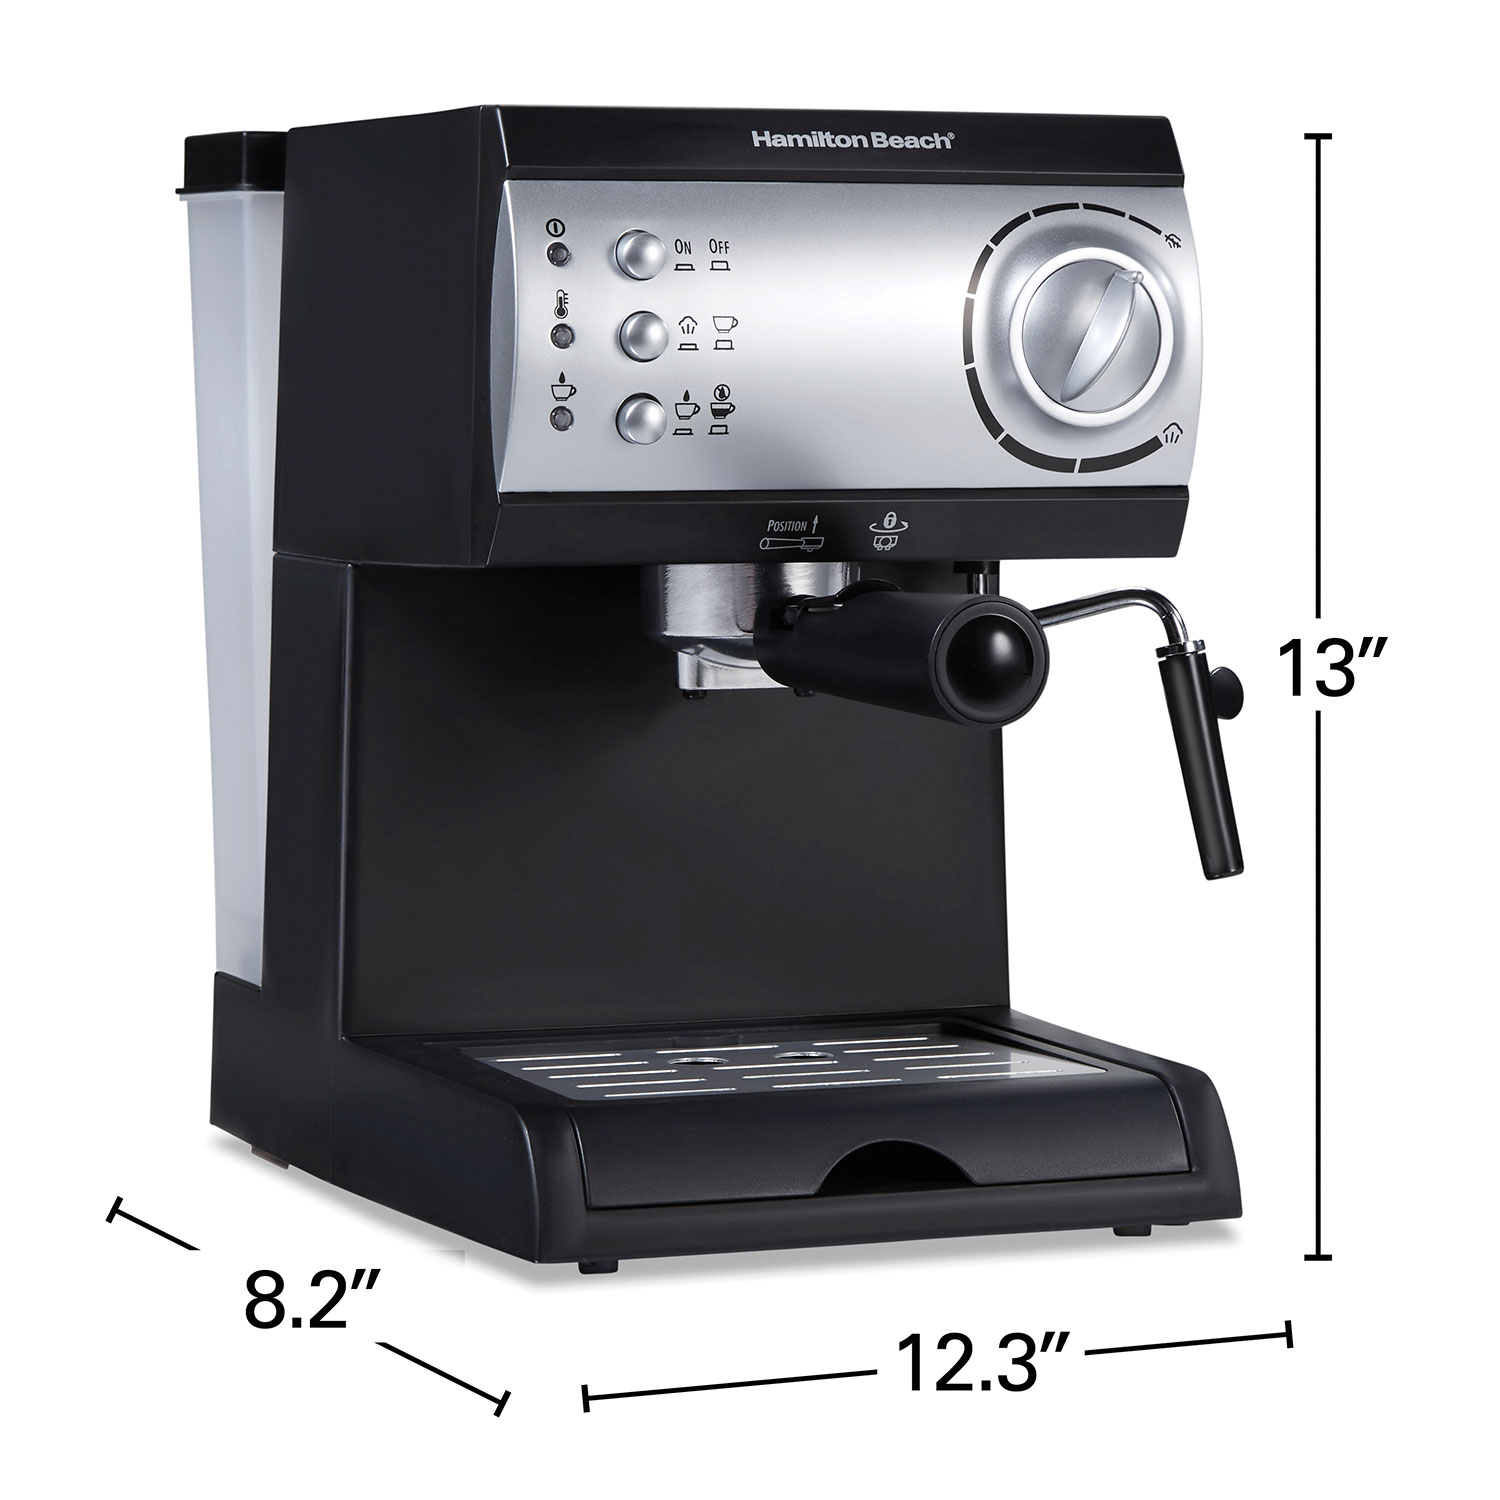 Hamilton Beach 15 Bar Espresso Machine, Cappuccino, Mocha, & Latte Maker,  with Milk Frother, Make 2 Cups Simultaneously, Works with Pods or Ground